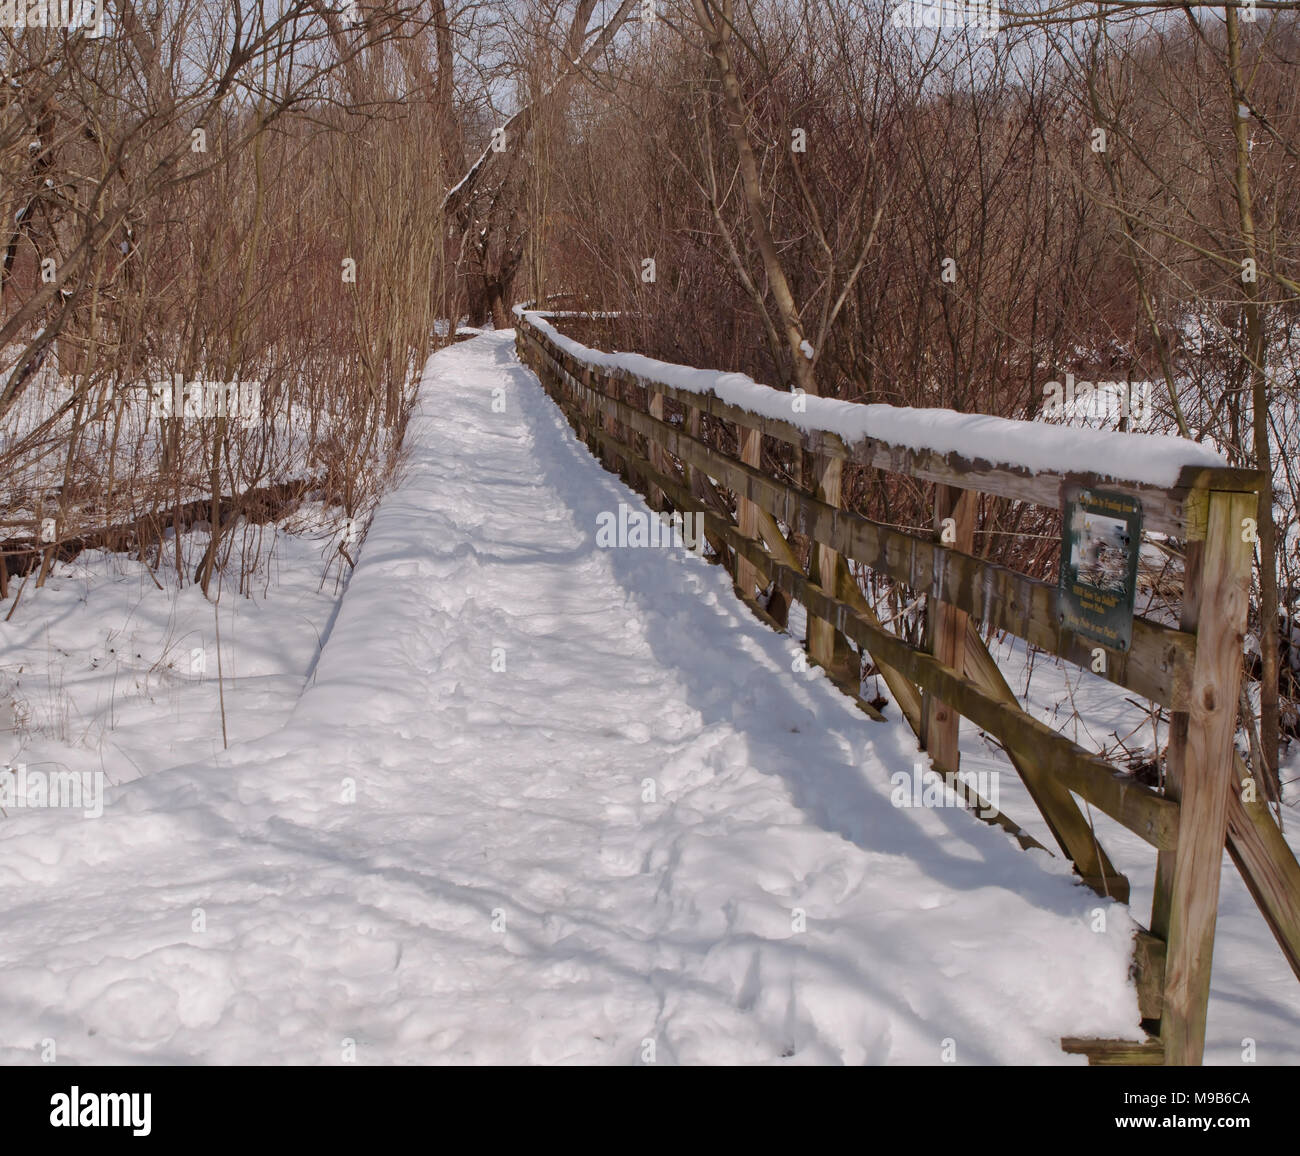 A snow covered wooden walkway through winter woods Stock Photo - Alamy